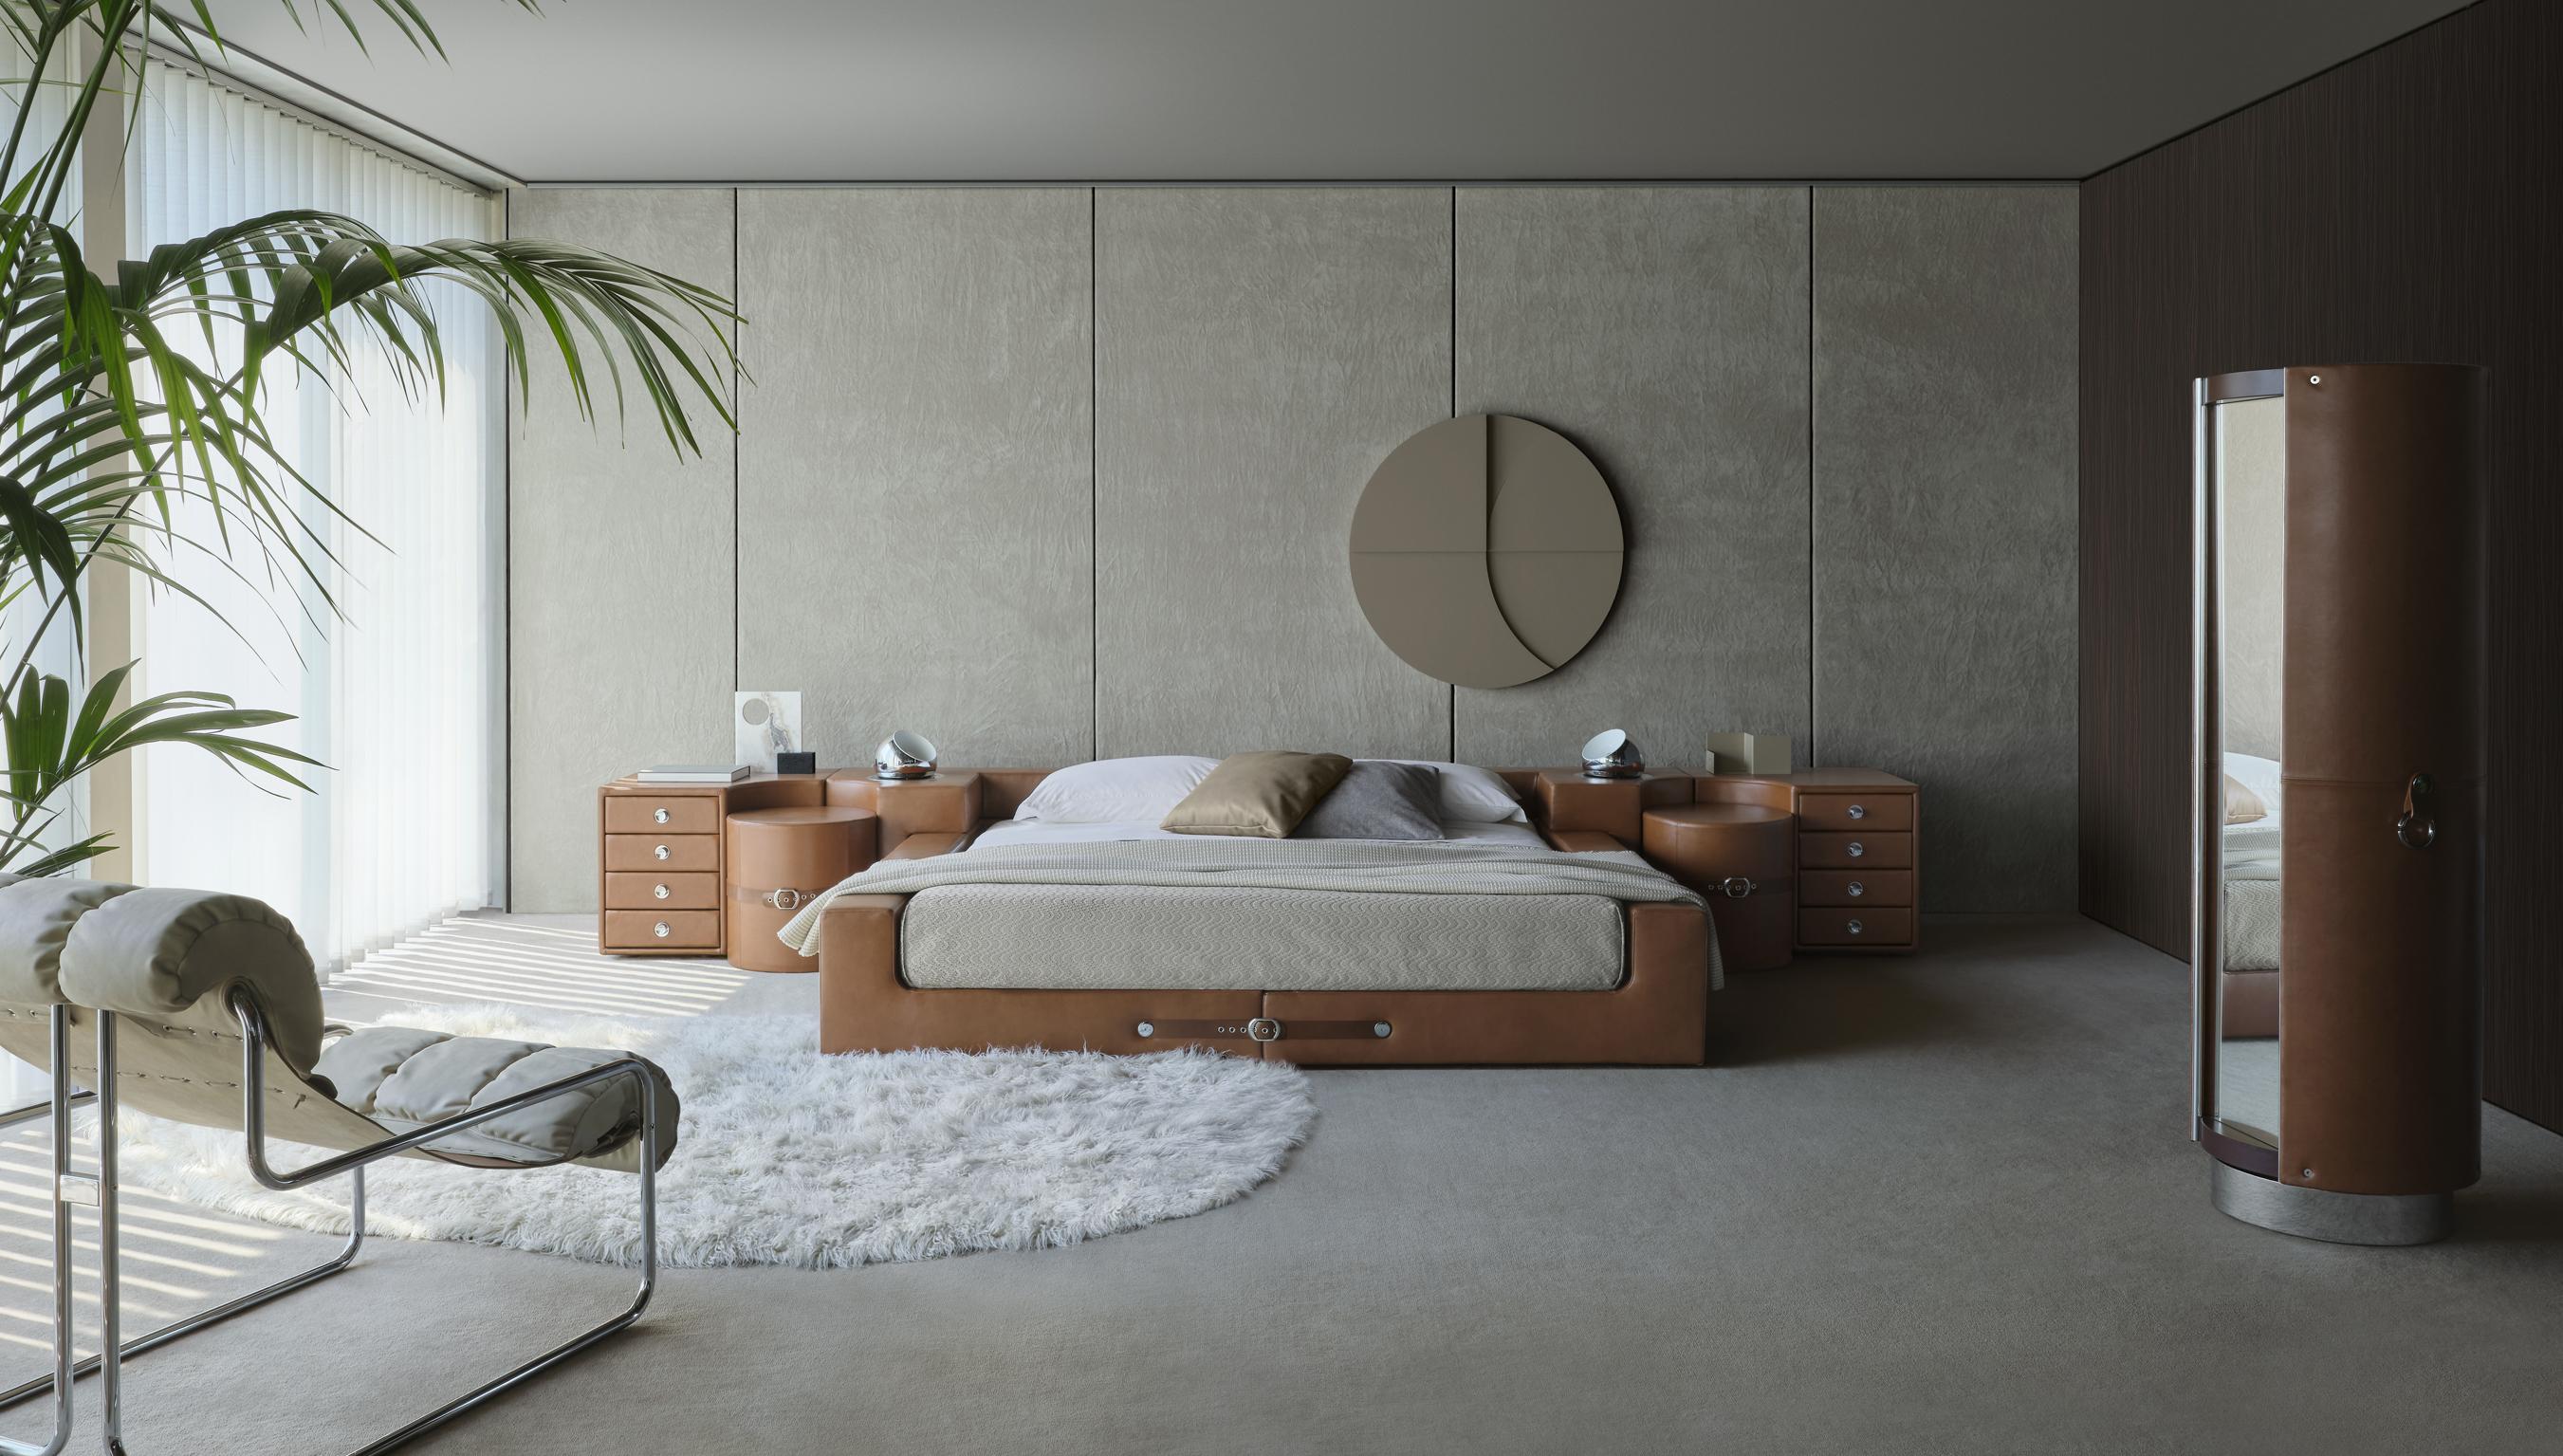 This famous 'Tucroma' bed design, as seen in the Lenny Kravitz Architectural Digest magazine photoshoot, was designed by Guido Faleschini in the 1970s and produced by i4Mariani (Italy). 

*NOTE, the bed we have in stock is pending sale, therefore